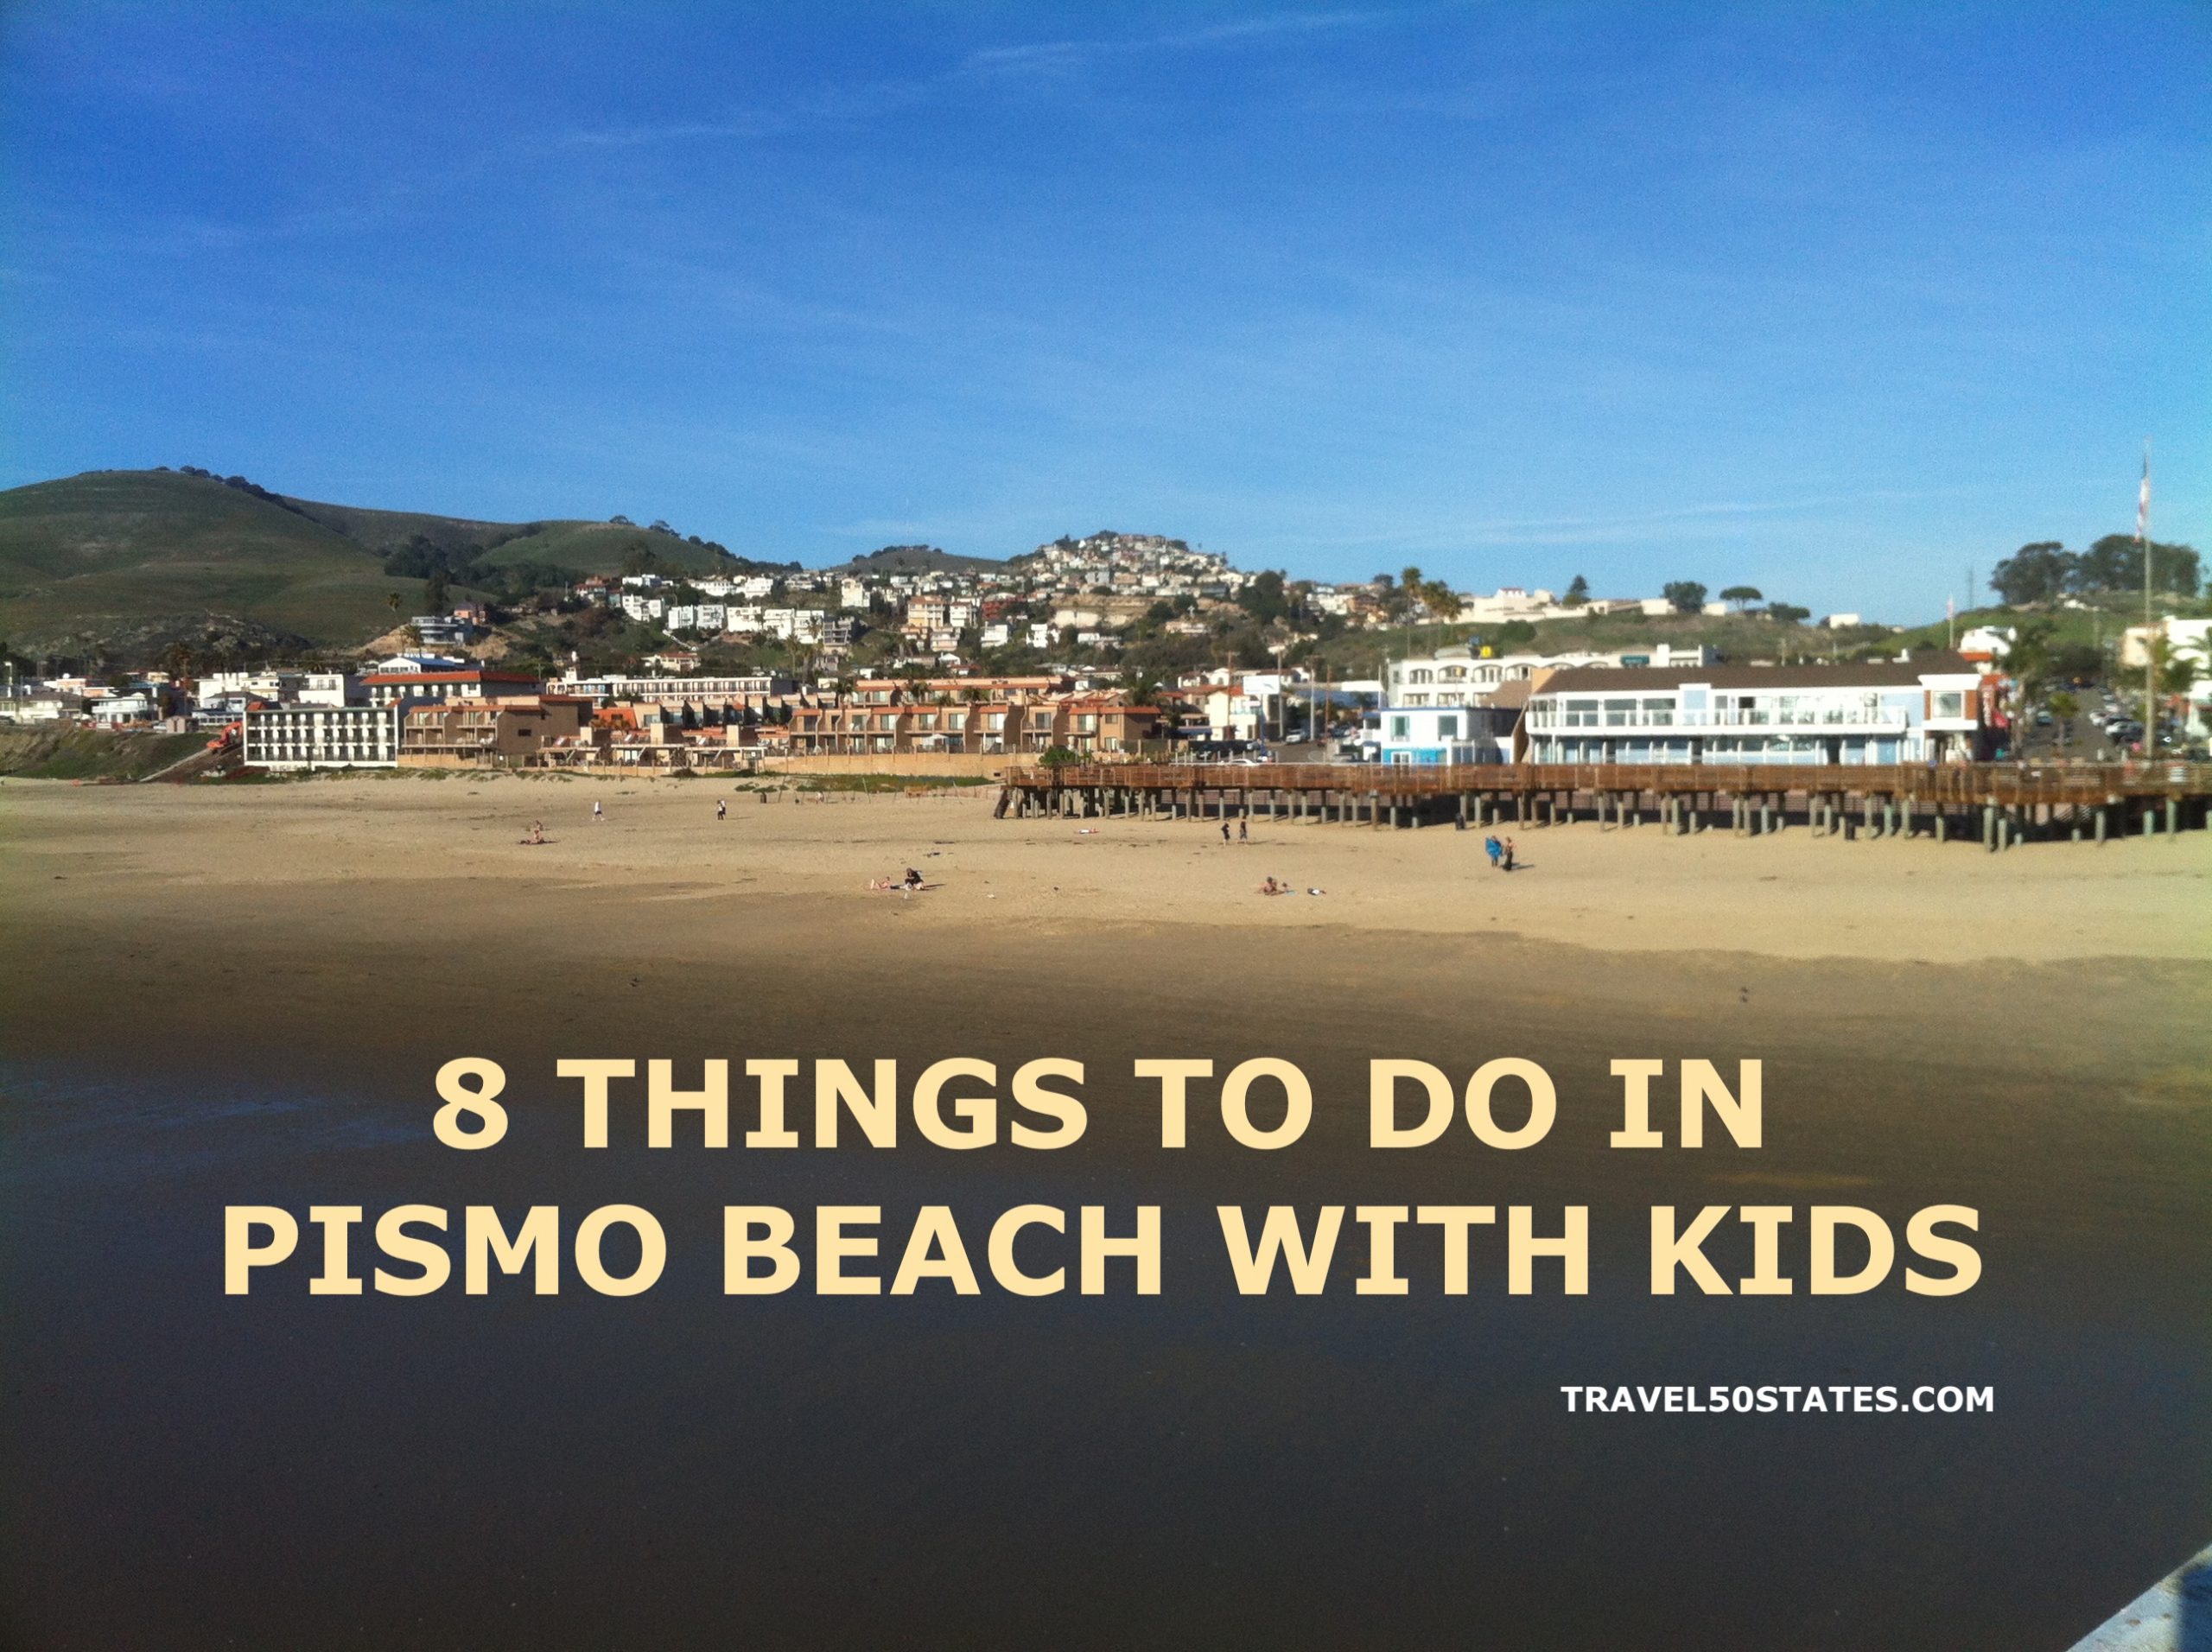 8 THINGS TO DO IN PISMO BEACH, CA WITH KIDS